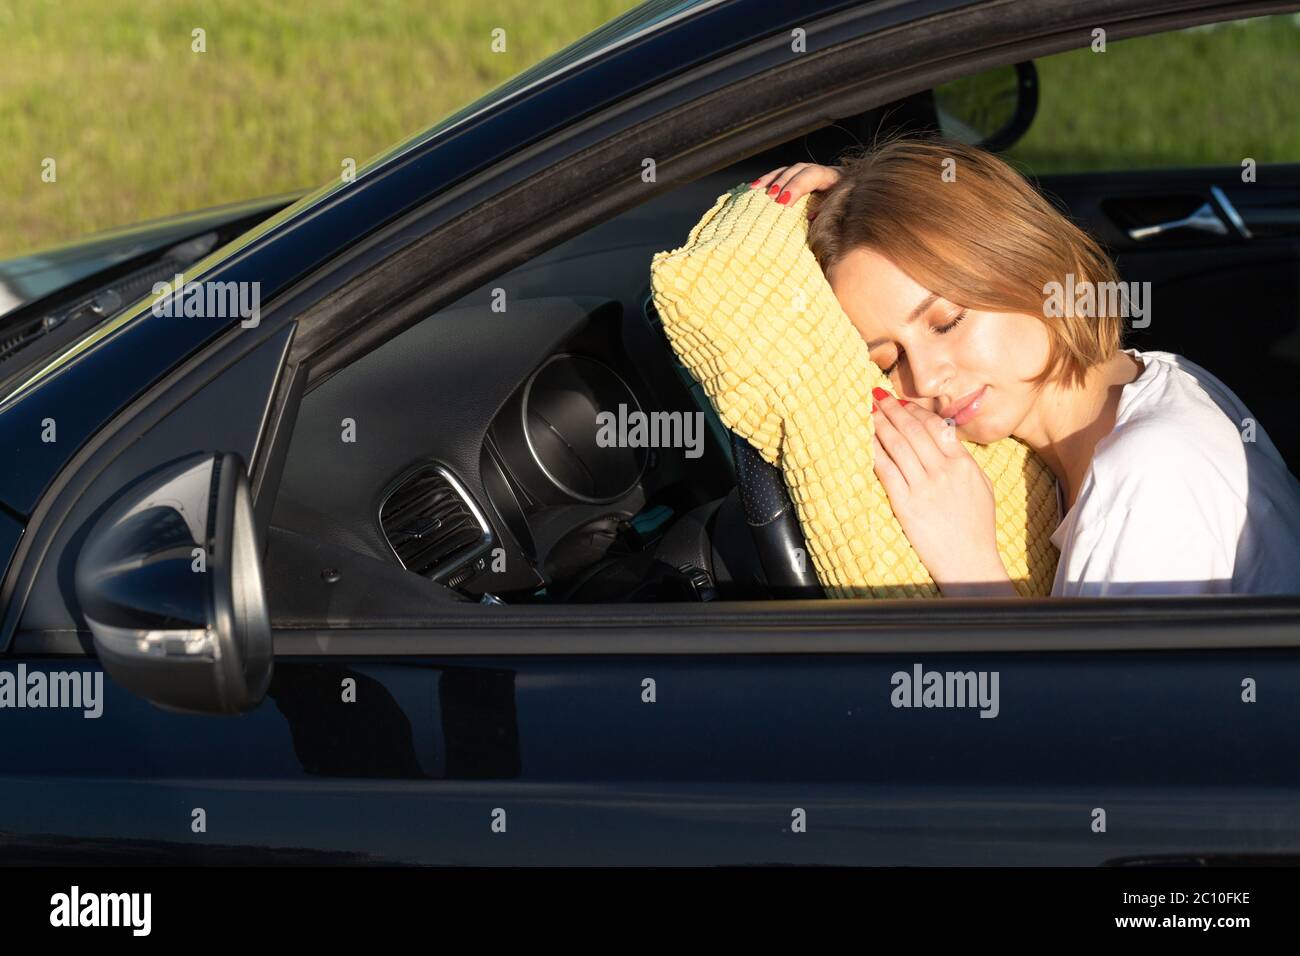 Tired young woman driver asleep on pillow on steering wheel, resting after long hours driving a car. Fatigue. Sleep deprivation. Stock Photo